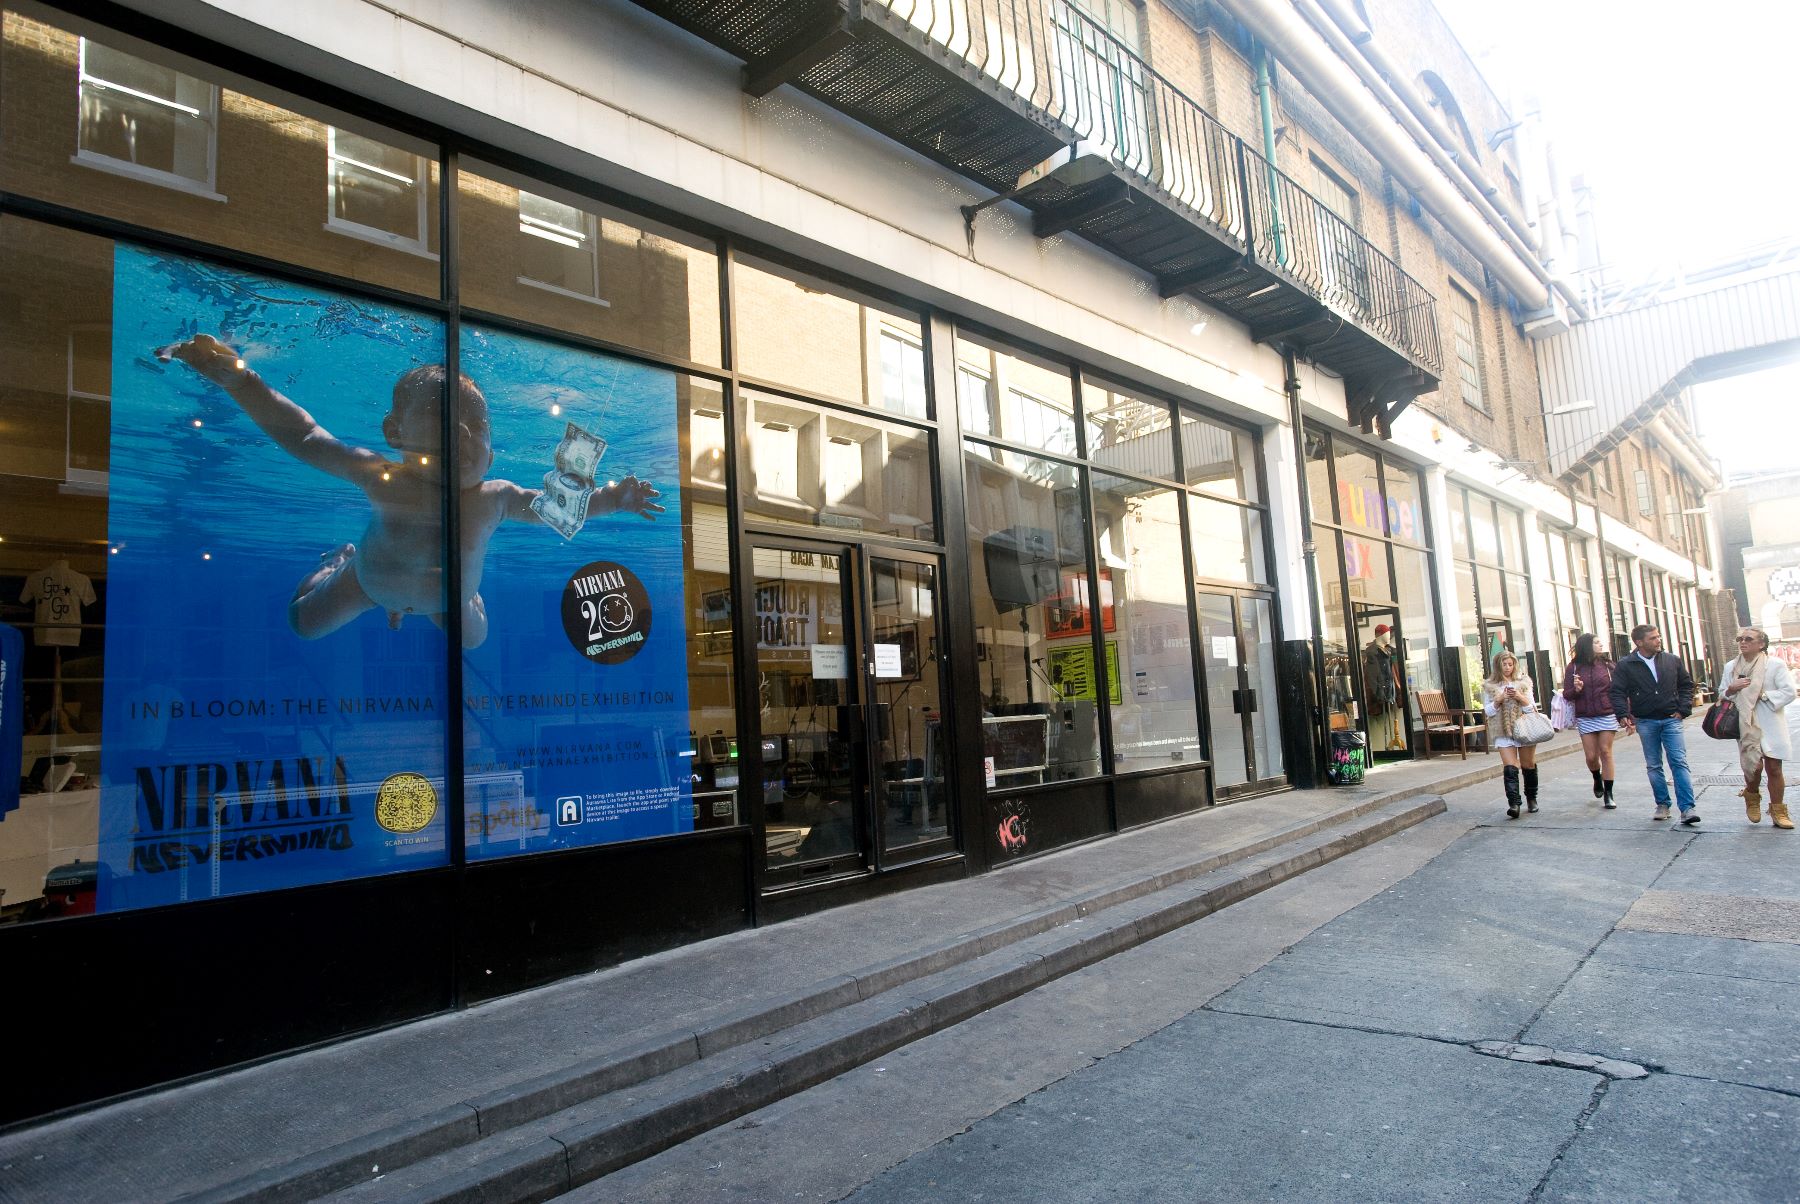 A Nirvana 'Nevermind' exhibition at the Loading Bay Gallery in London, England